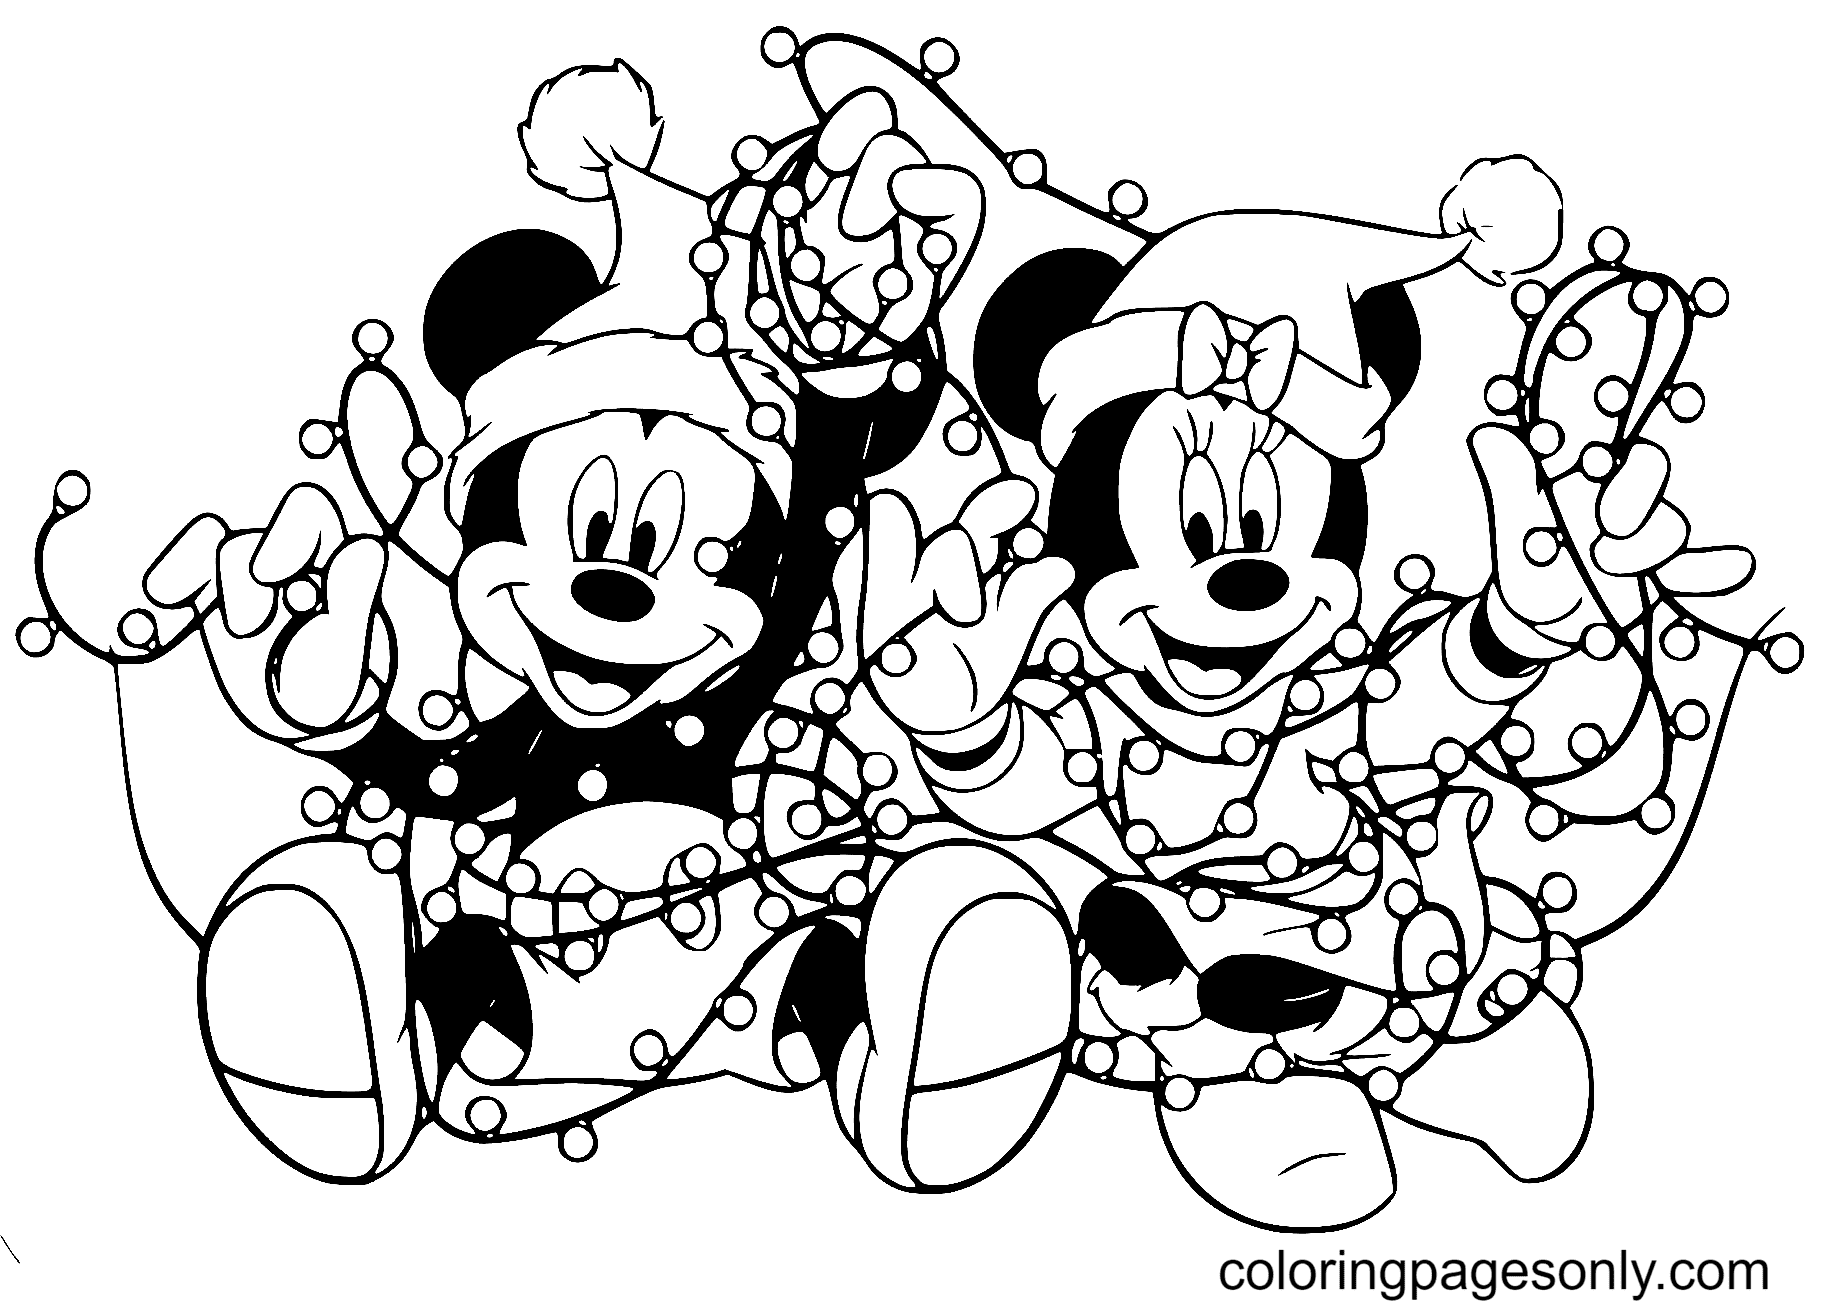 Mickey Minnie Tangled in Christmas Lights Coloring Page